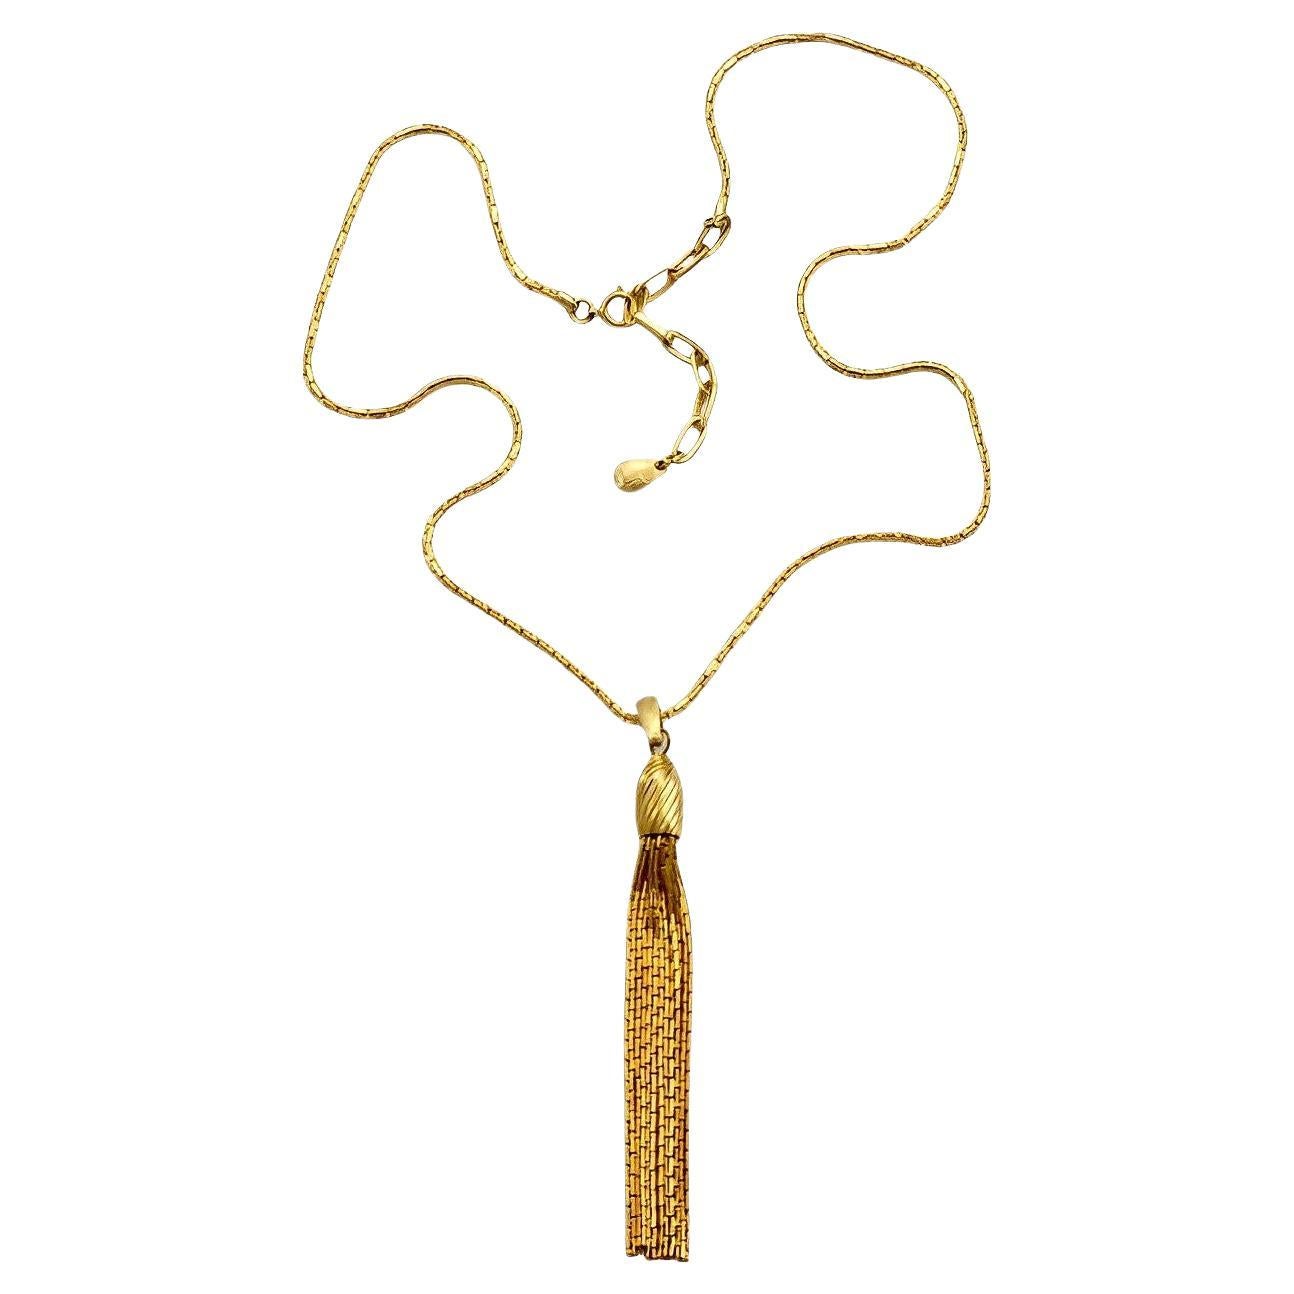 Gold Plated Elongated Box Chain Tassel Necklace circa 1980s For Sale